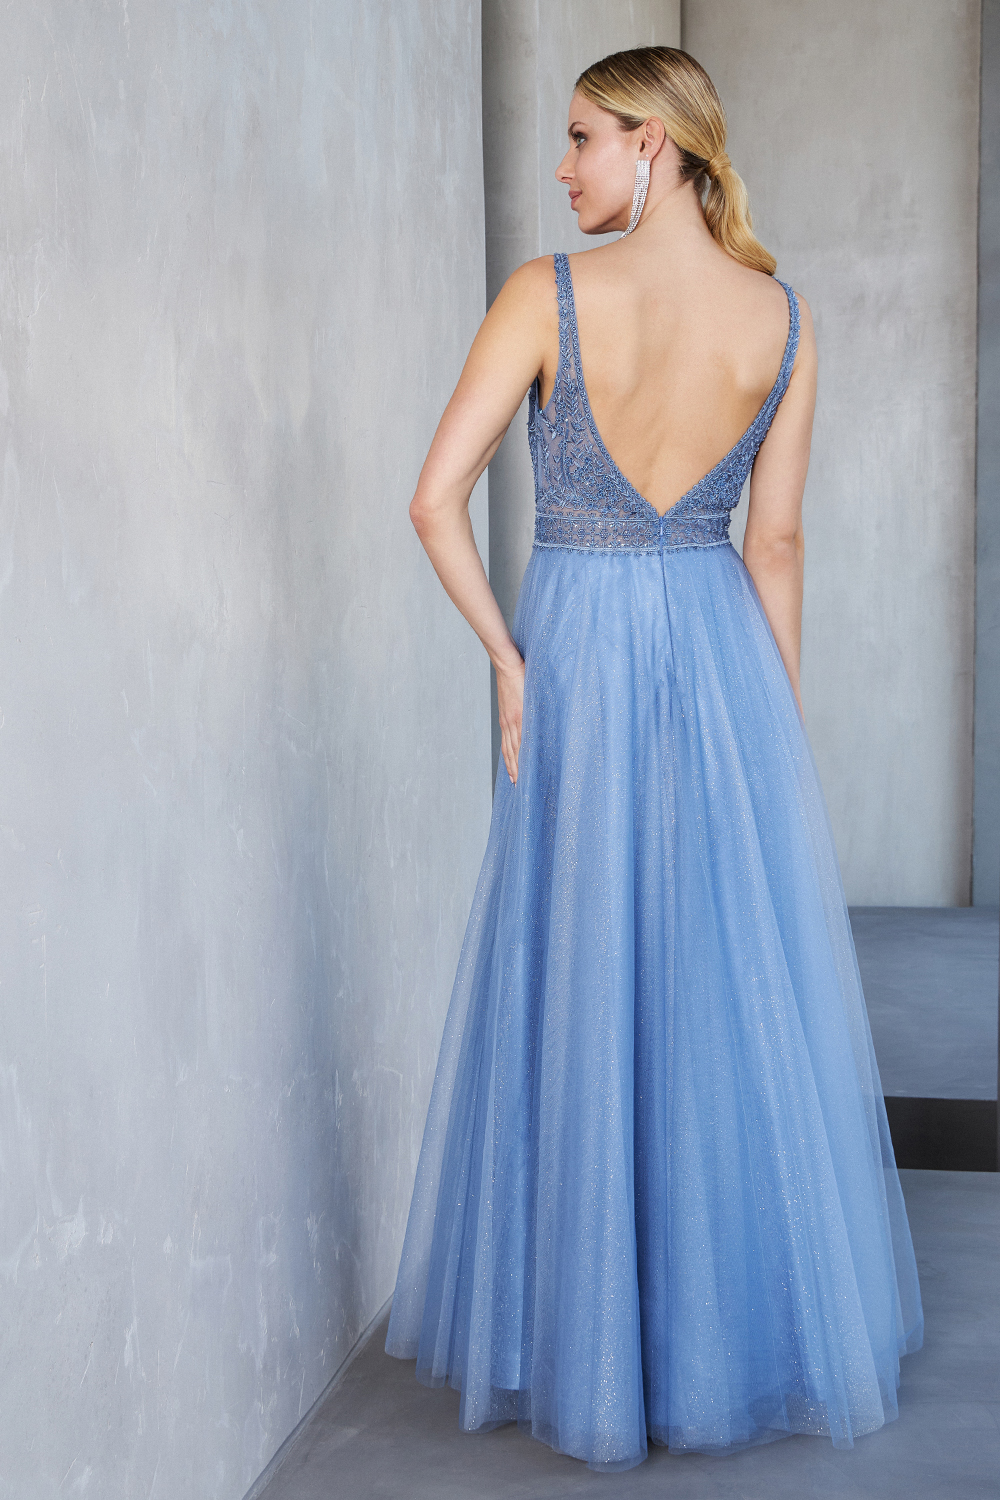 Evening Dresses / Long evening dress with shining tulle fabric and fully beaded top